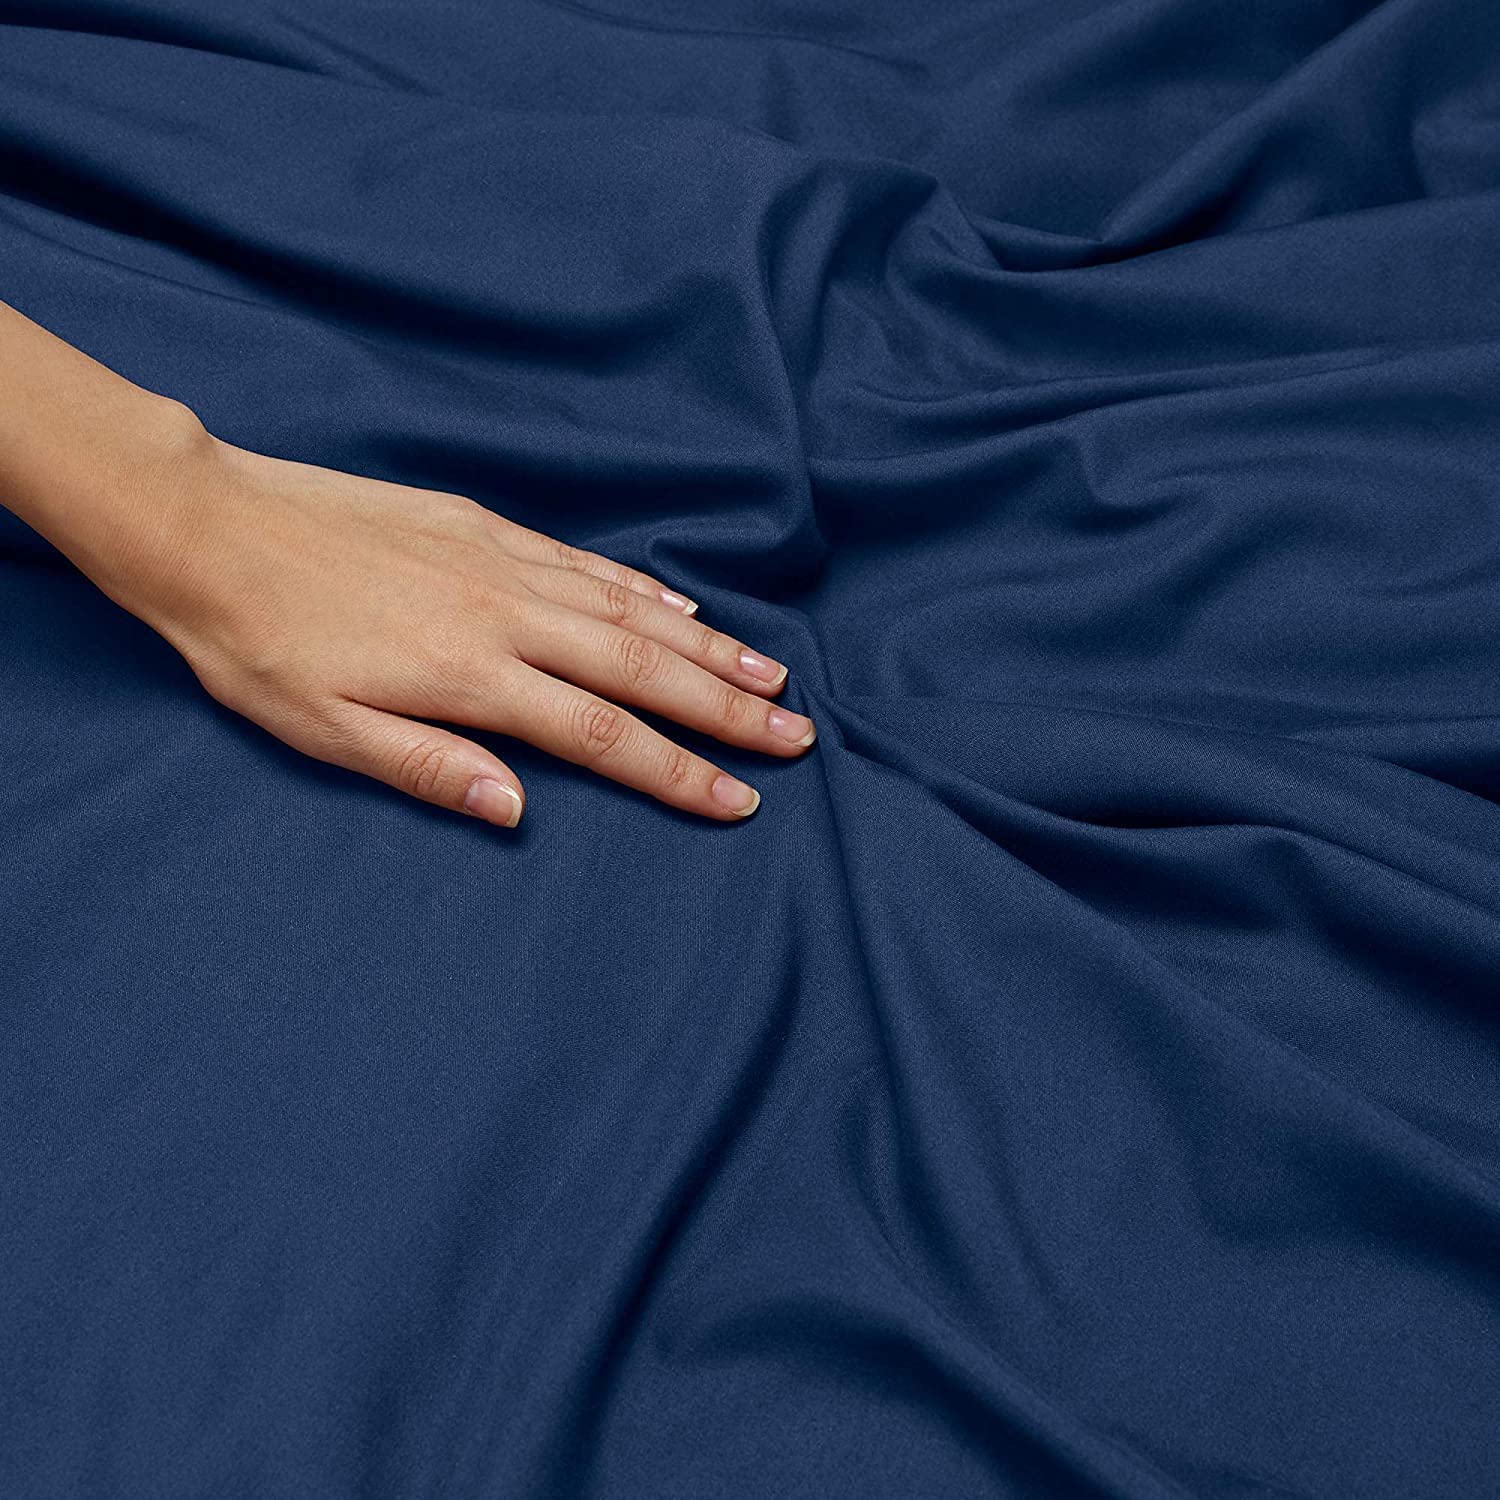 100% Pure Egyptian Cotton King Navy Duvet Cover Set 400 Thread Count- 3 Piece- Sateen Weave- Long Staple Combed Cotton-Extra Soft Smooth Silky- Sateen Weave (King,Navy)